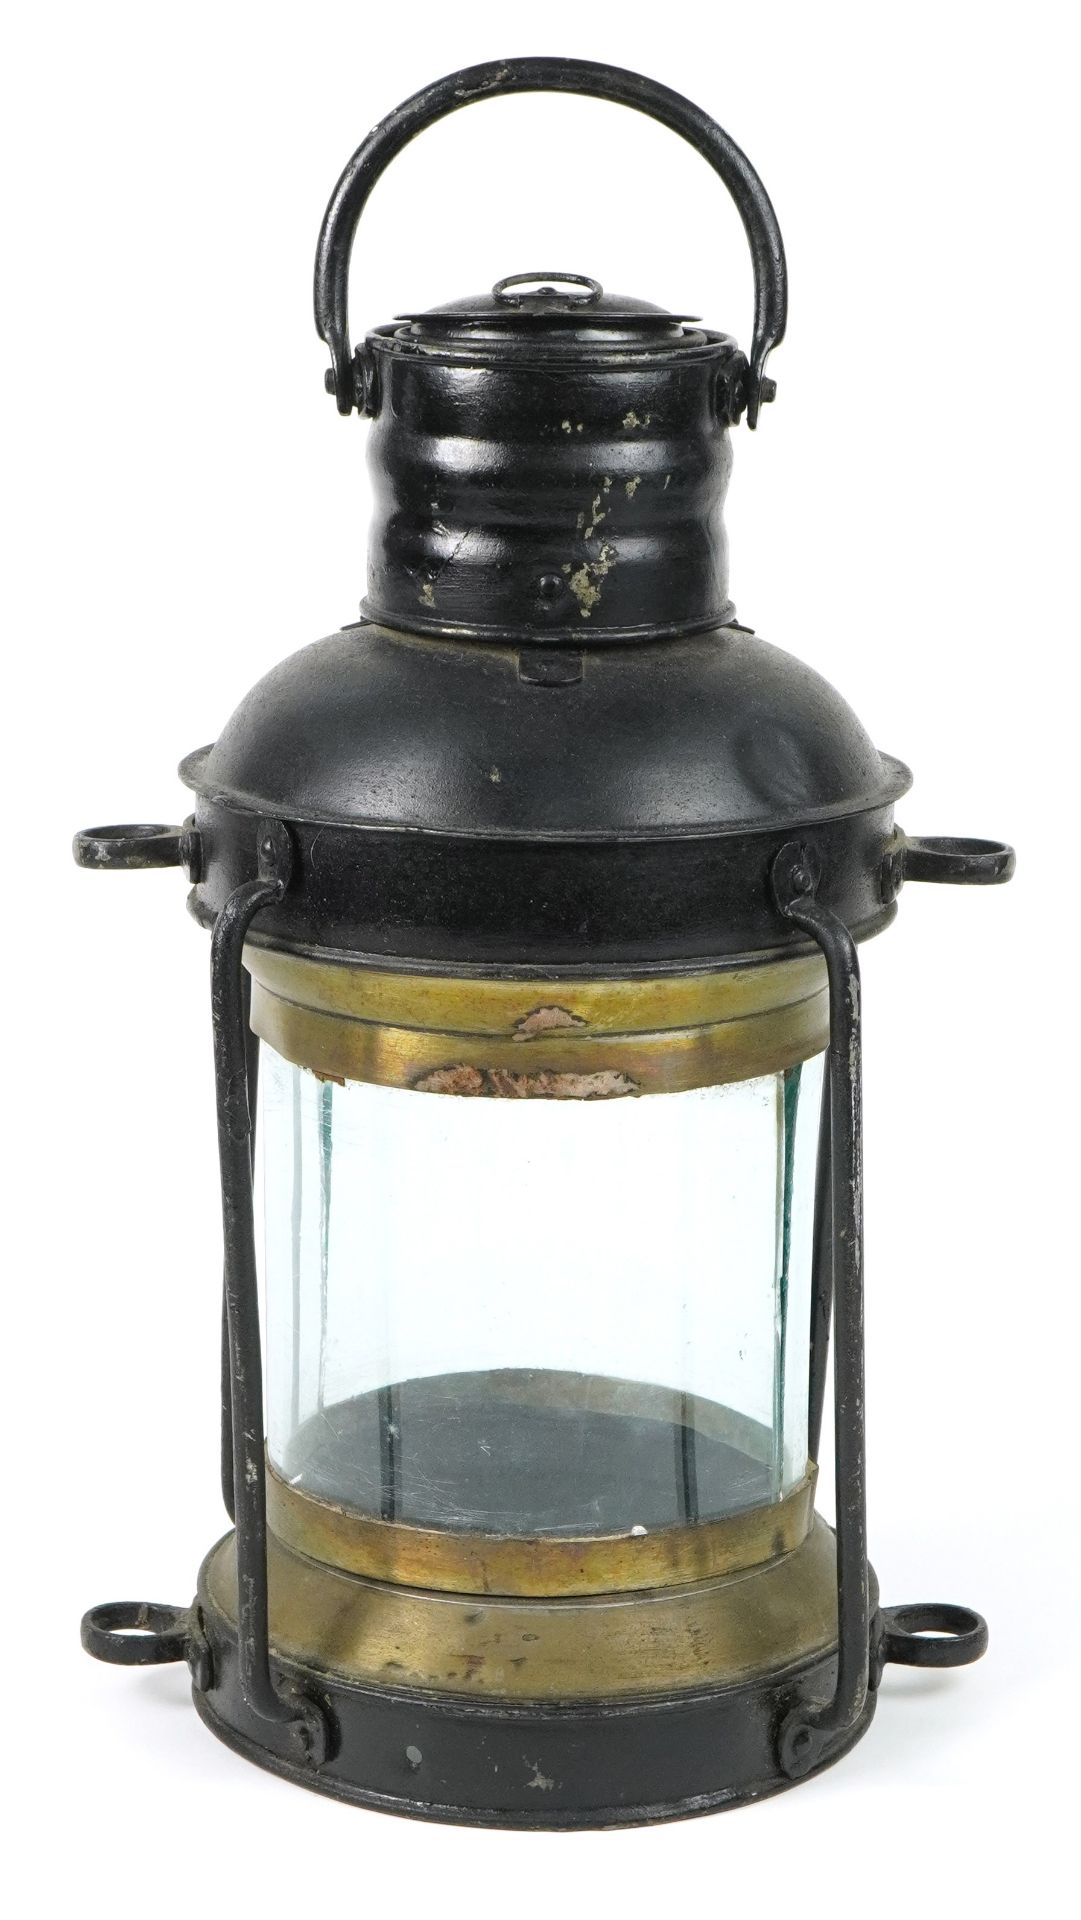 Antique shipping interest ship's hanging lantern with glass panel, 42cm high excluding the handle - Bild 2 aus 3